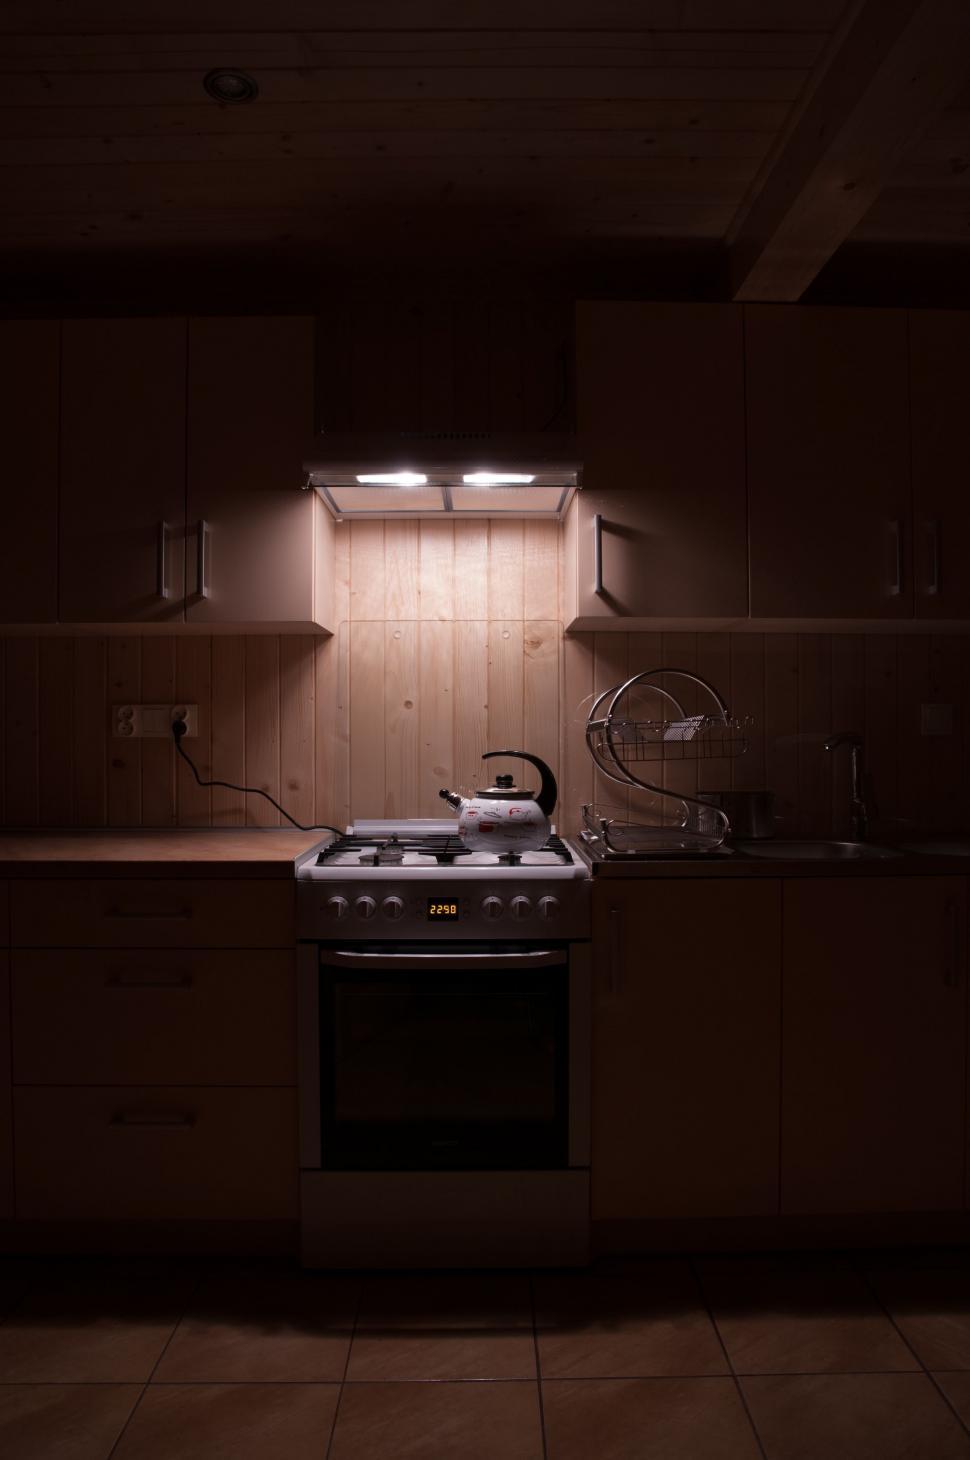 Free Image of Dimly Lit Kitchen With Sink and Stove 